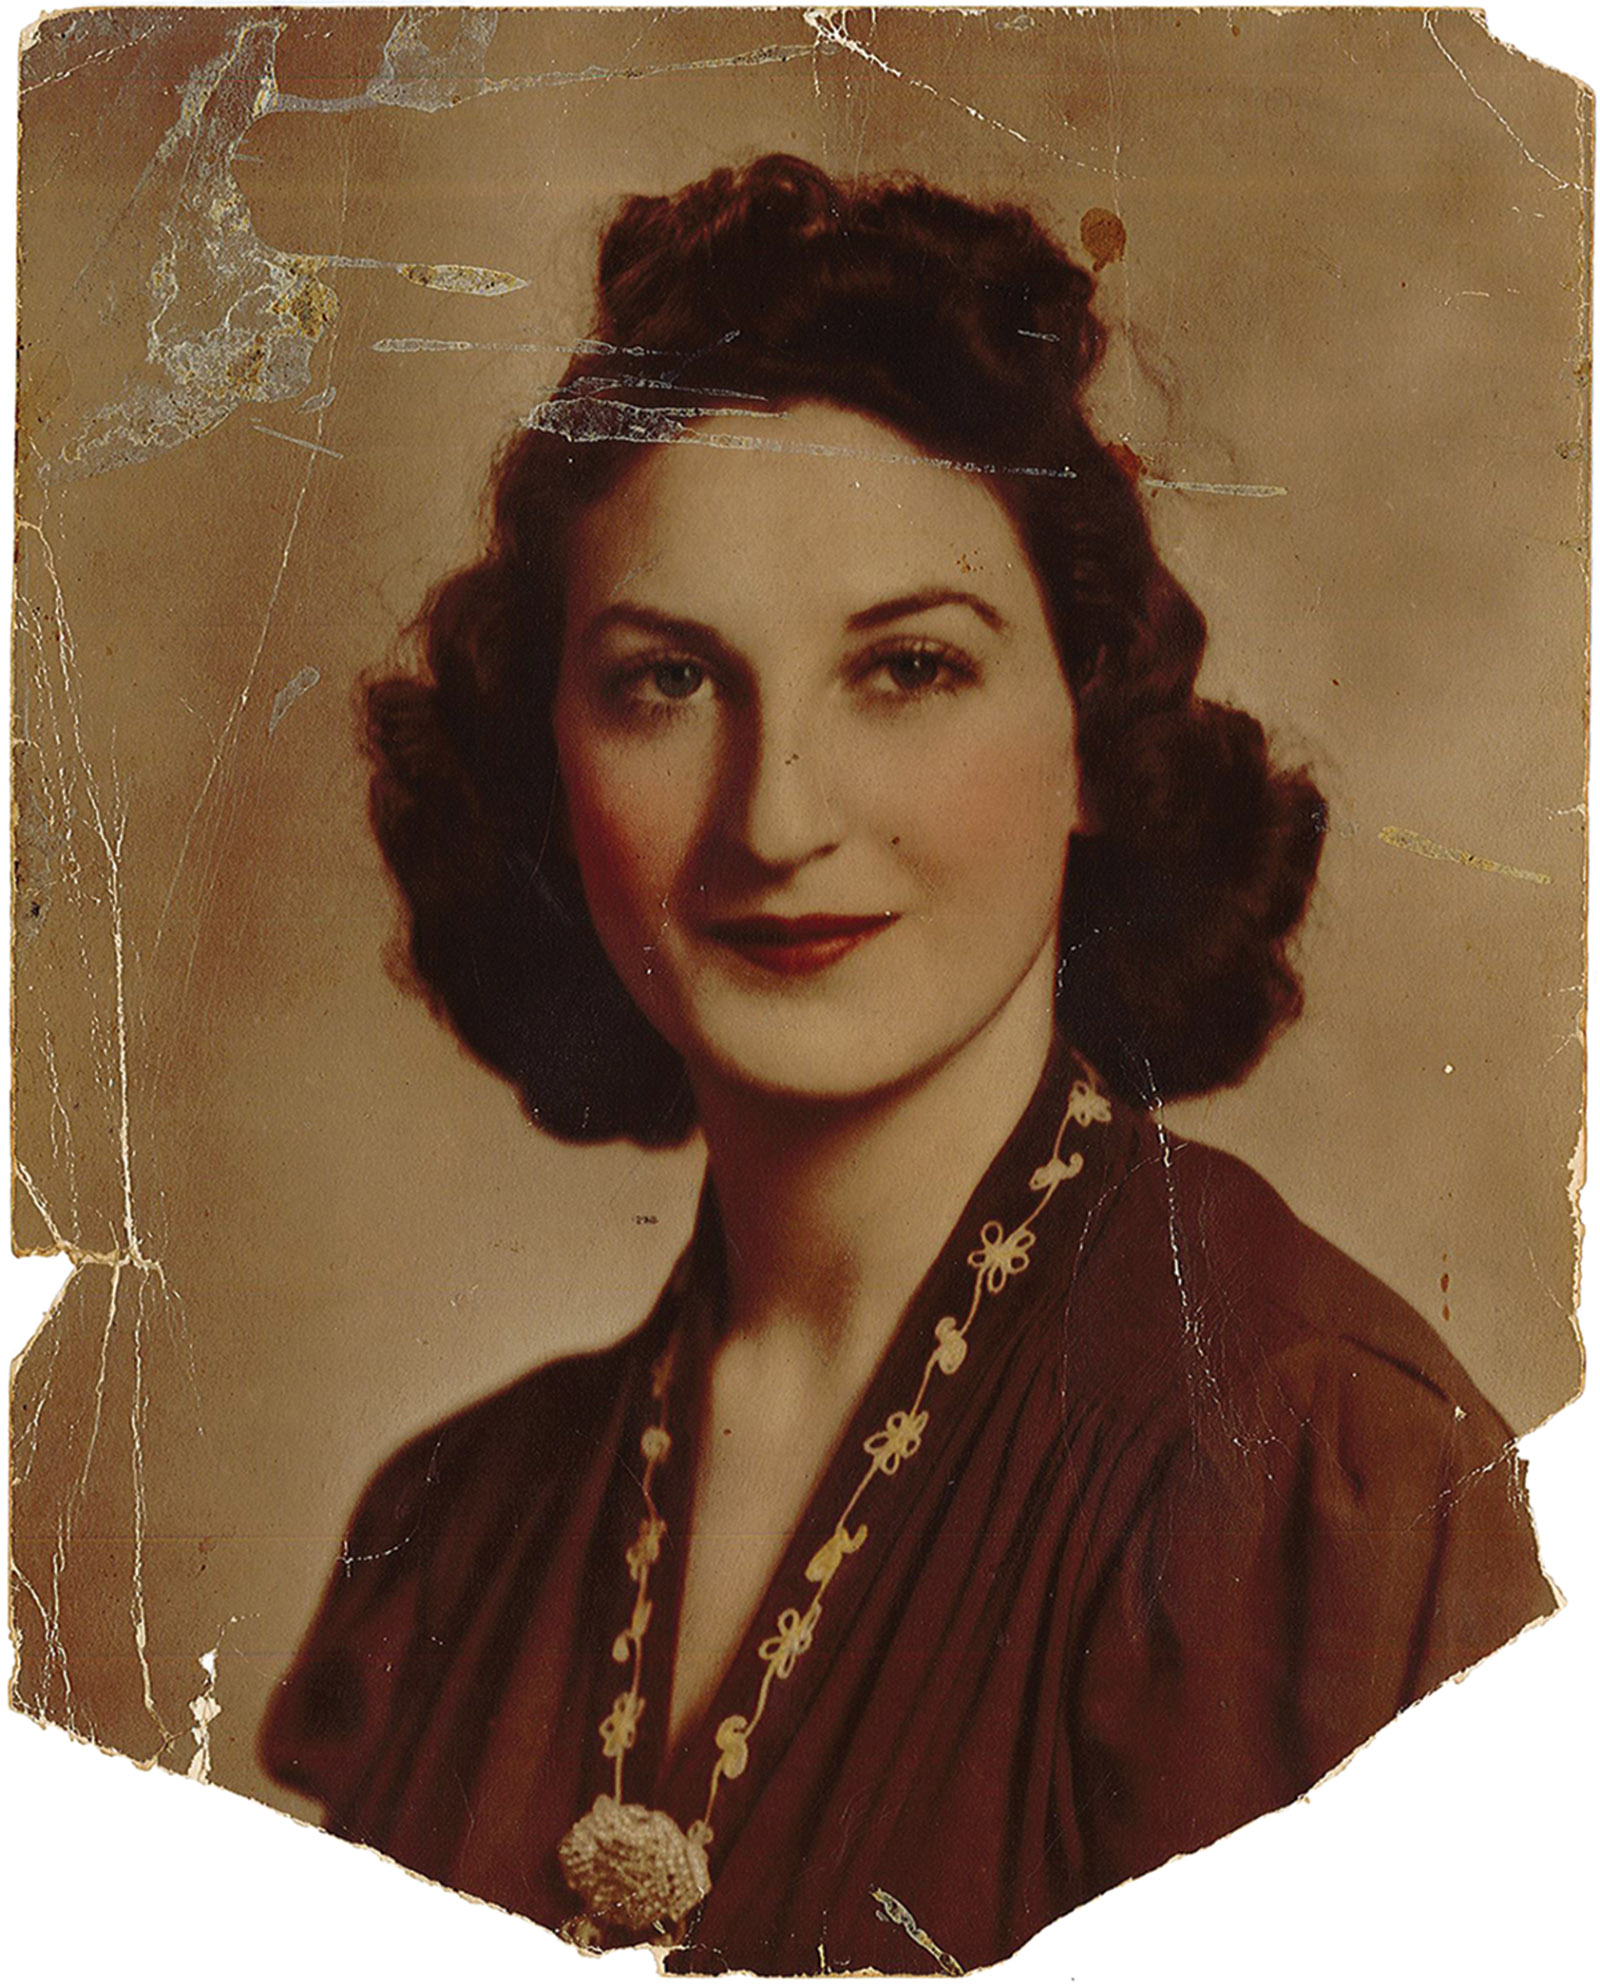 Phillip Lopate’s mother, Frances Lopate, in a portrait made by a photographer who worked for Lincoln Studios, Newark, New Jersey, 1939